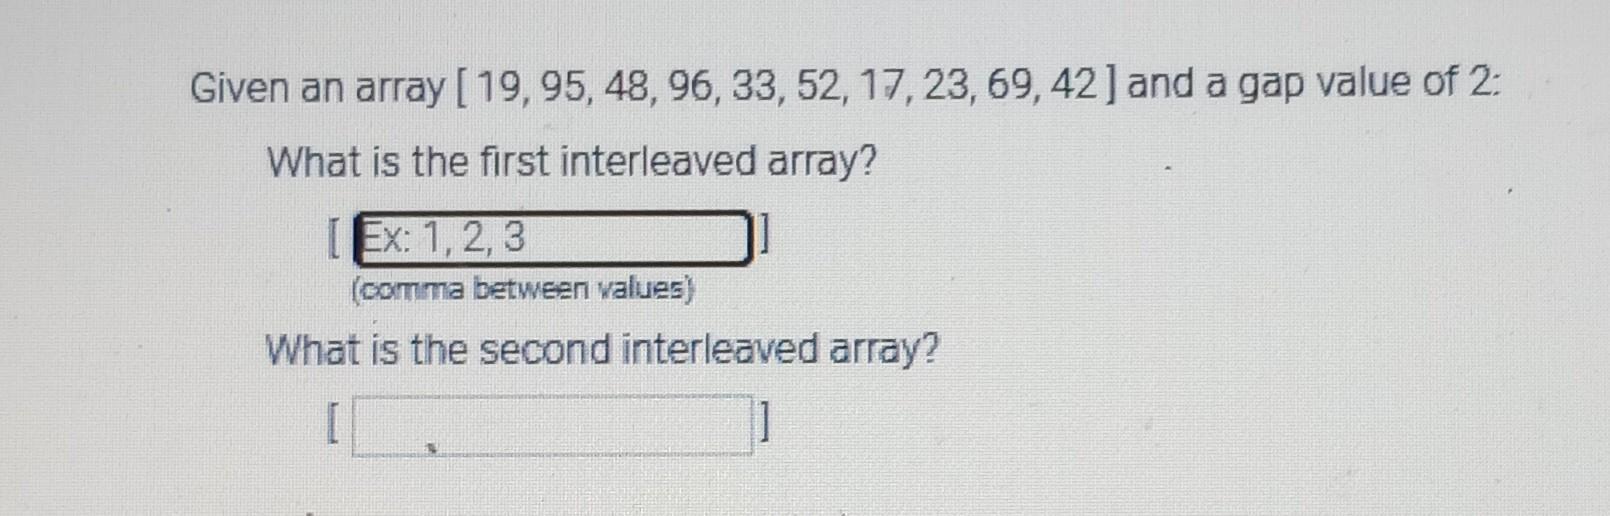 Given an array [19, 95, 48, 96, 33, 52, 17, 23, 69, 42] and a gap value of 2: What is the first interleaved